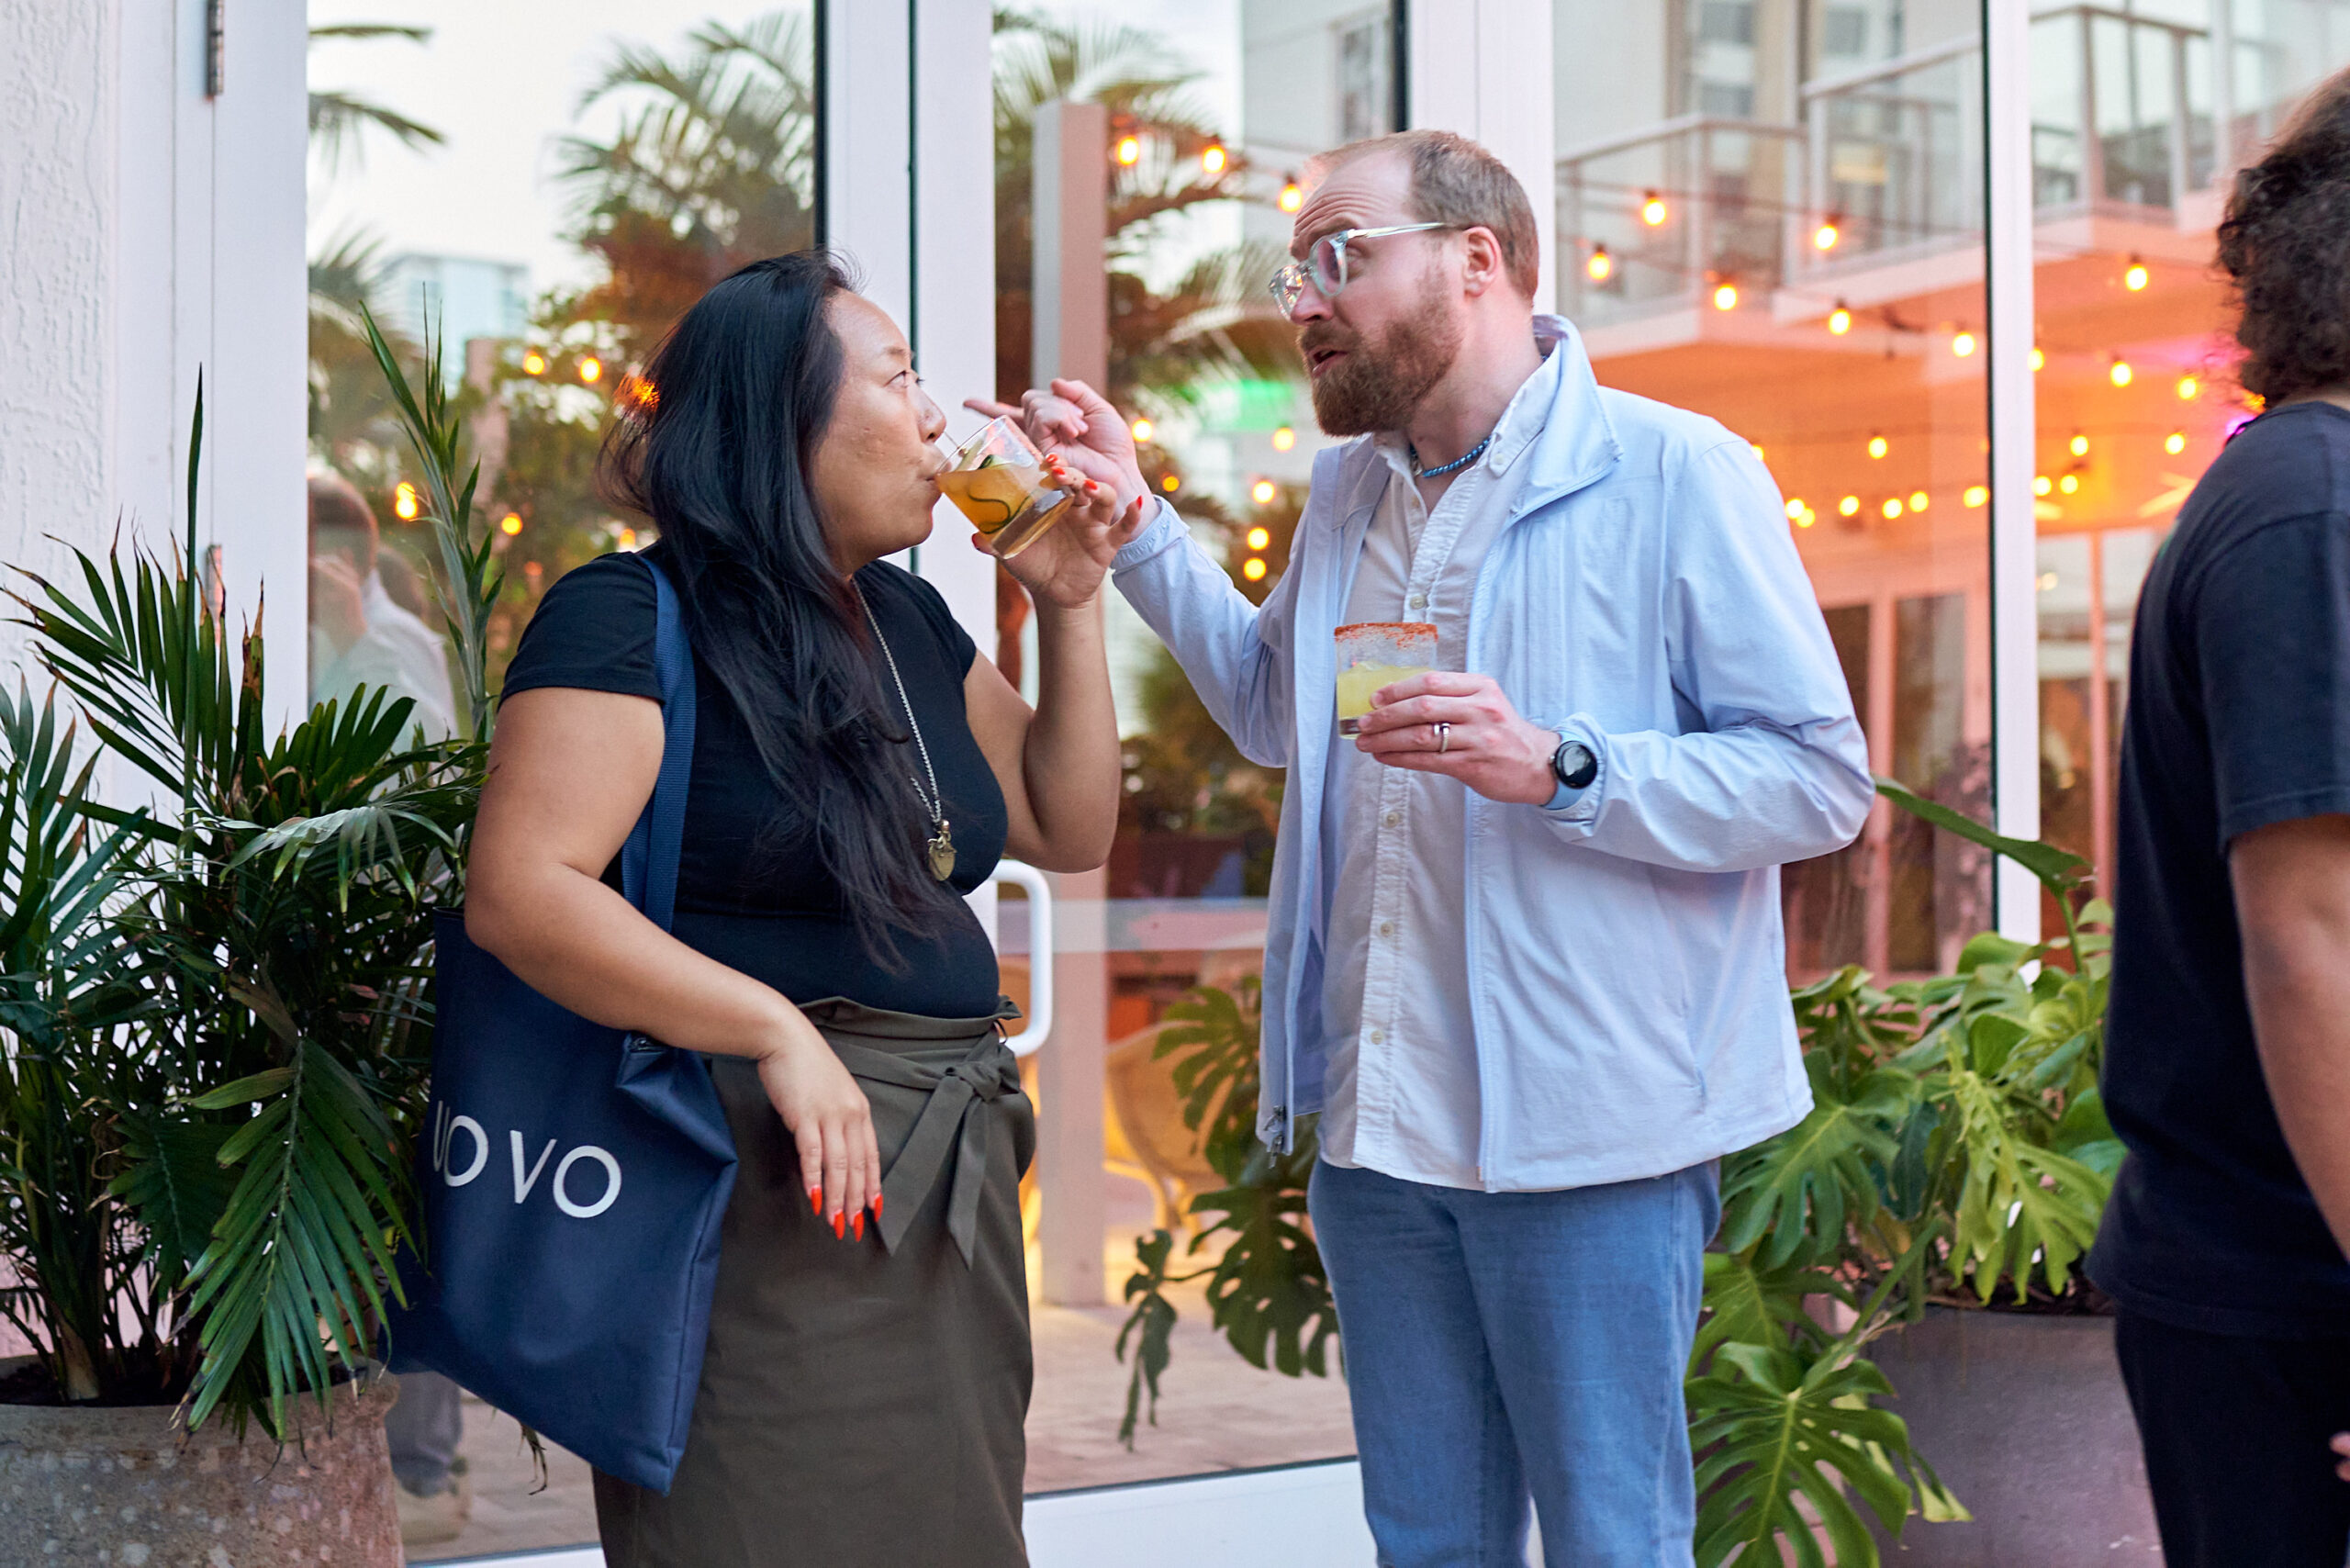 Two people stand outside a building with string lights, engaged in conversation while holding drinks. One person has a black tote bag on their shoulder. Plants can be seen in the foreground.